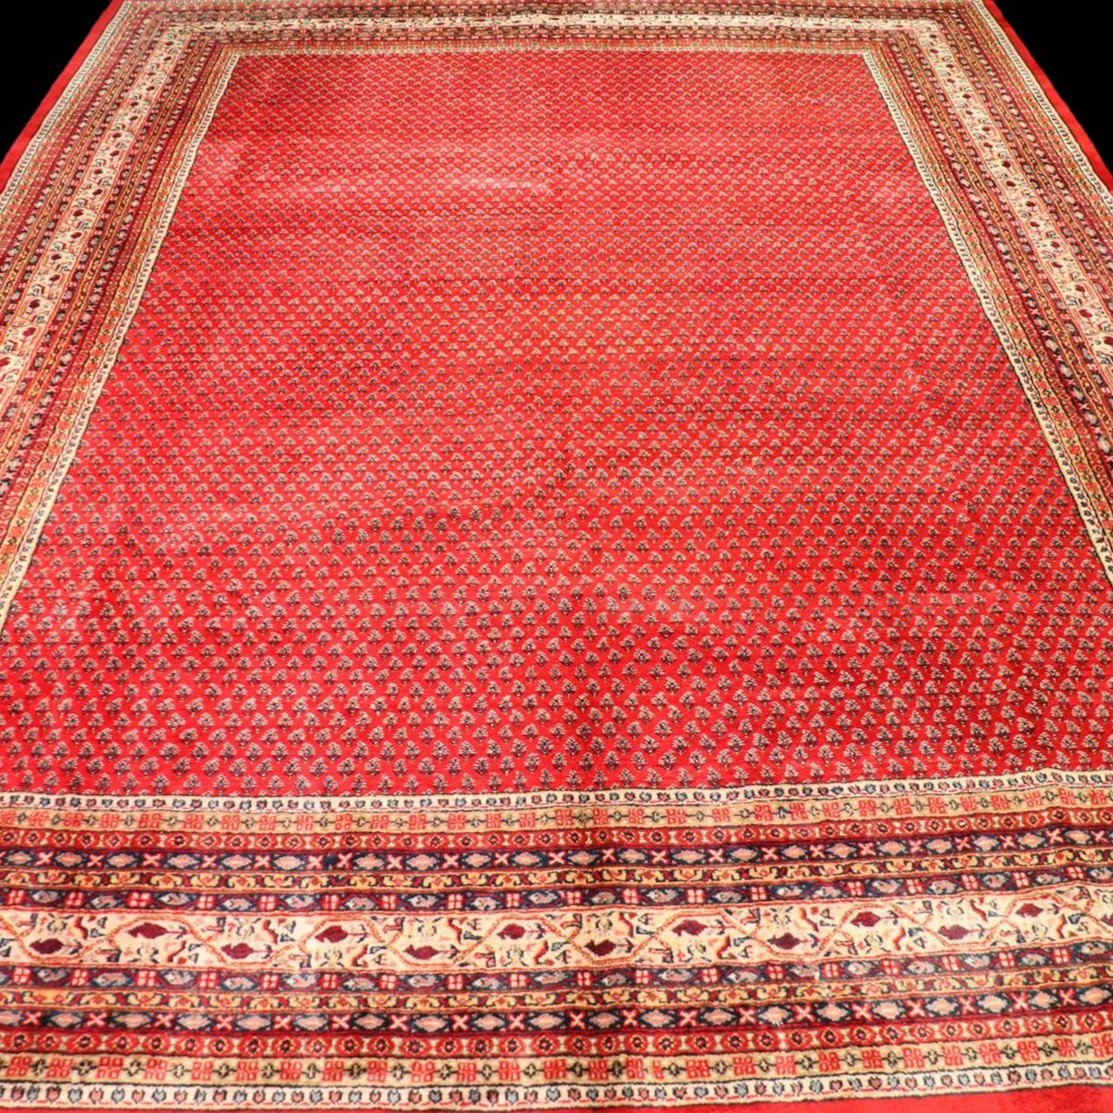 Important Sarough Mir, 288 Cm X 392 Cm, Hand-knotted Wool In Iran Around 1980, In Perfect Condition